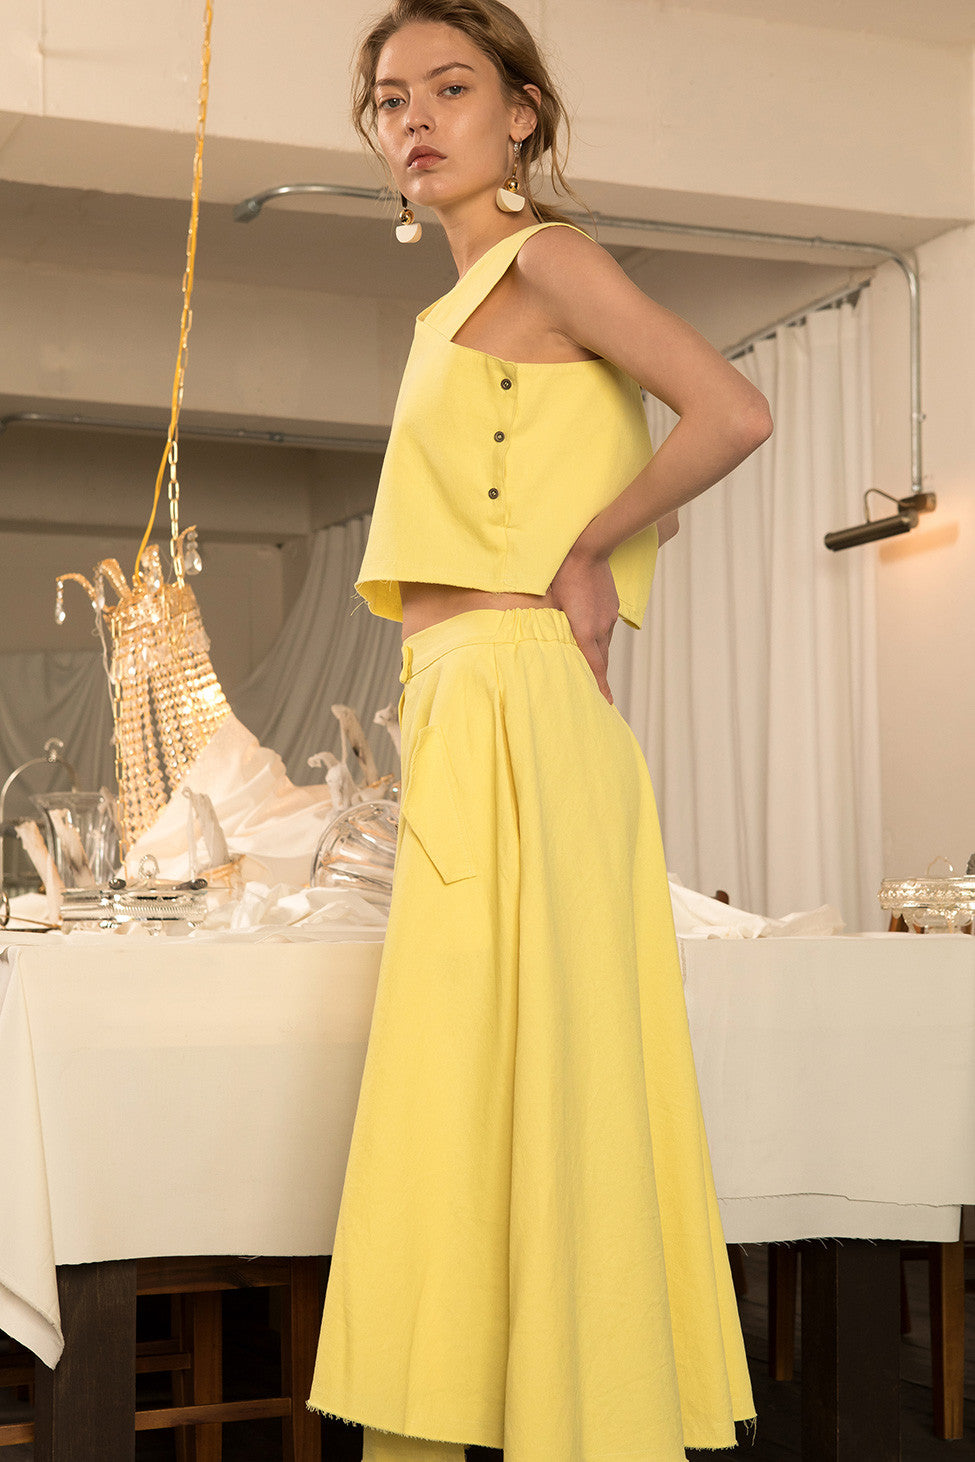 The Sonya set in Mustard, top featuring asymmetrical V-neckline, button closure along side. Skirt featuring slant pockets, asymmetrical hem in fluted edge, single button fastening with elasticated waistband, high waist in ankle length.